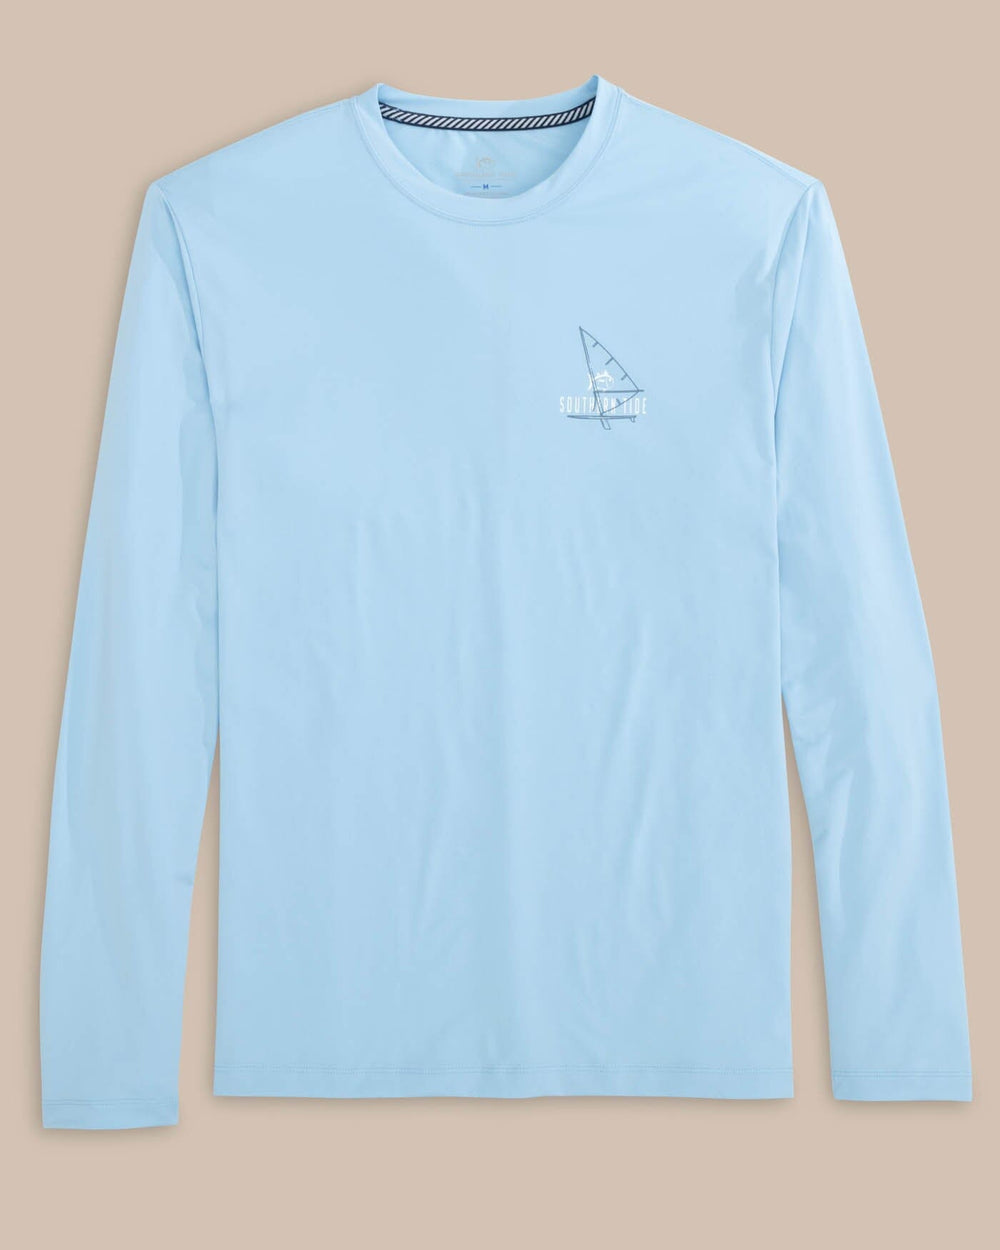 The front view of the Southern Tide Windsurfer Long Sleeve Performance T-shirt by Southern Tide - Clearwater Blue